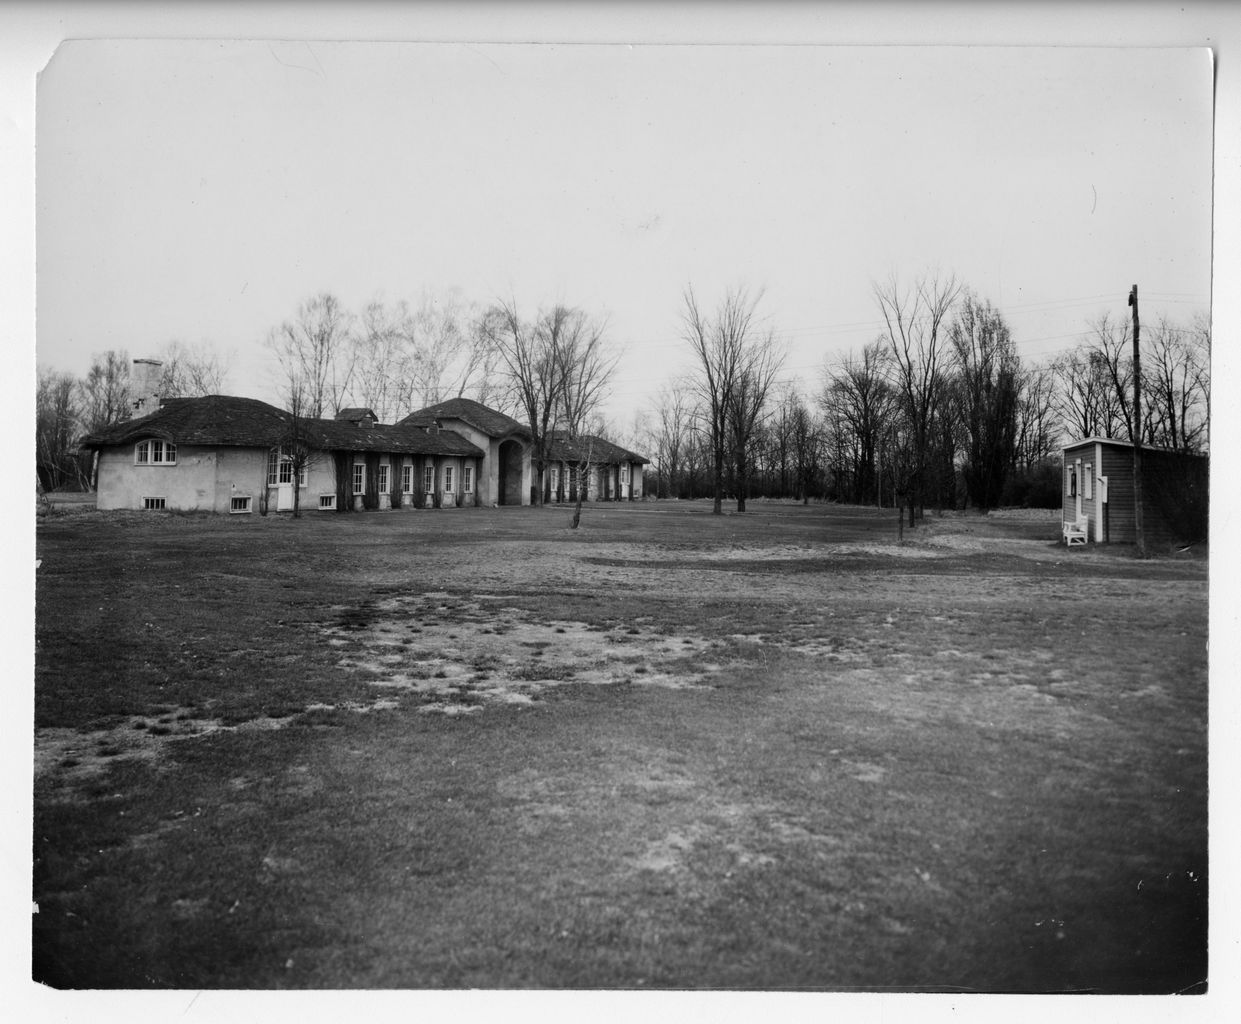 Black and white photograph of the Drummondville Golf & Country Club clubhouse. The building, which is built lengthwise, is covered in climbing plants and surrounded by trees.